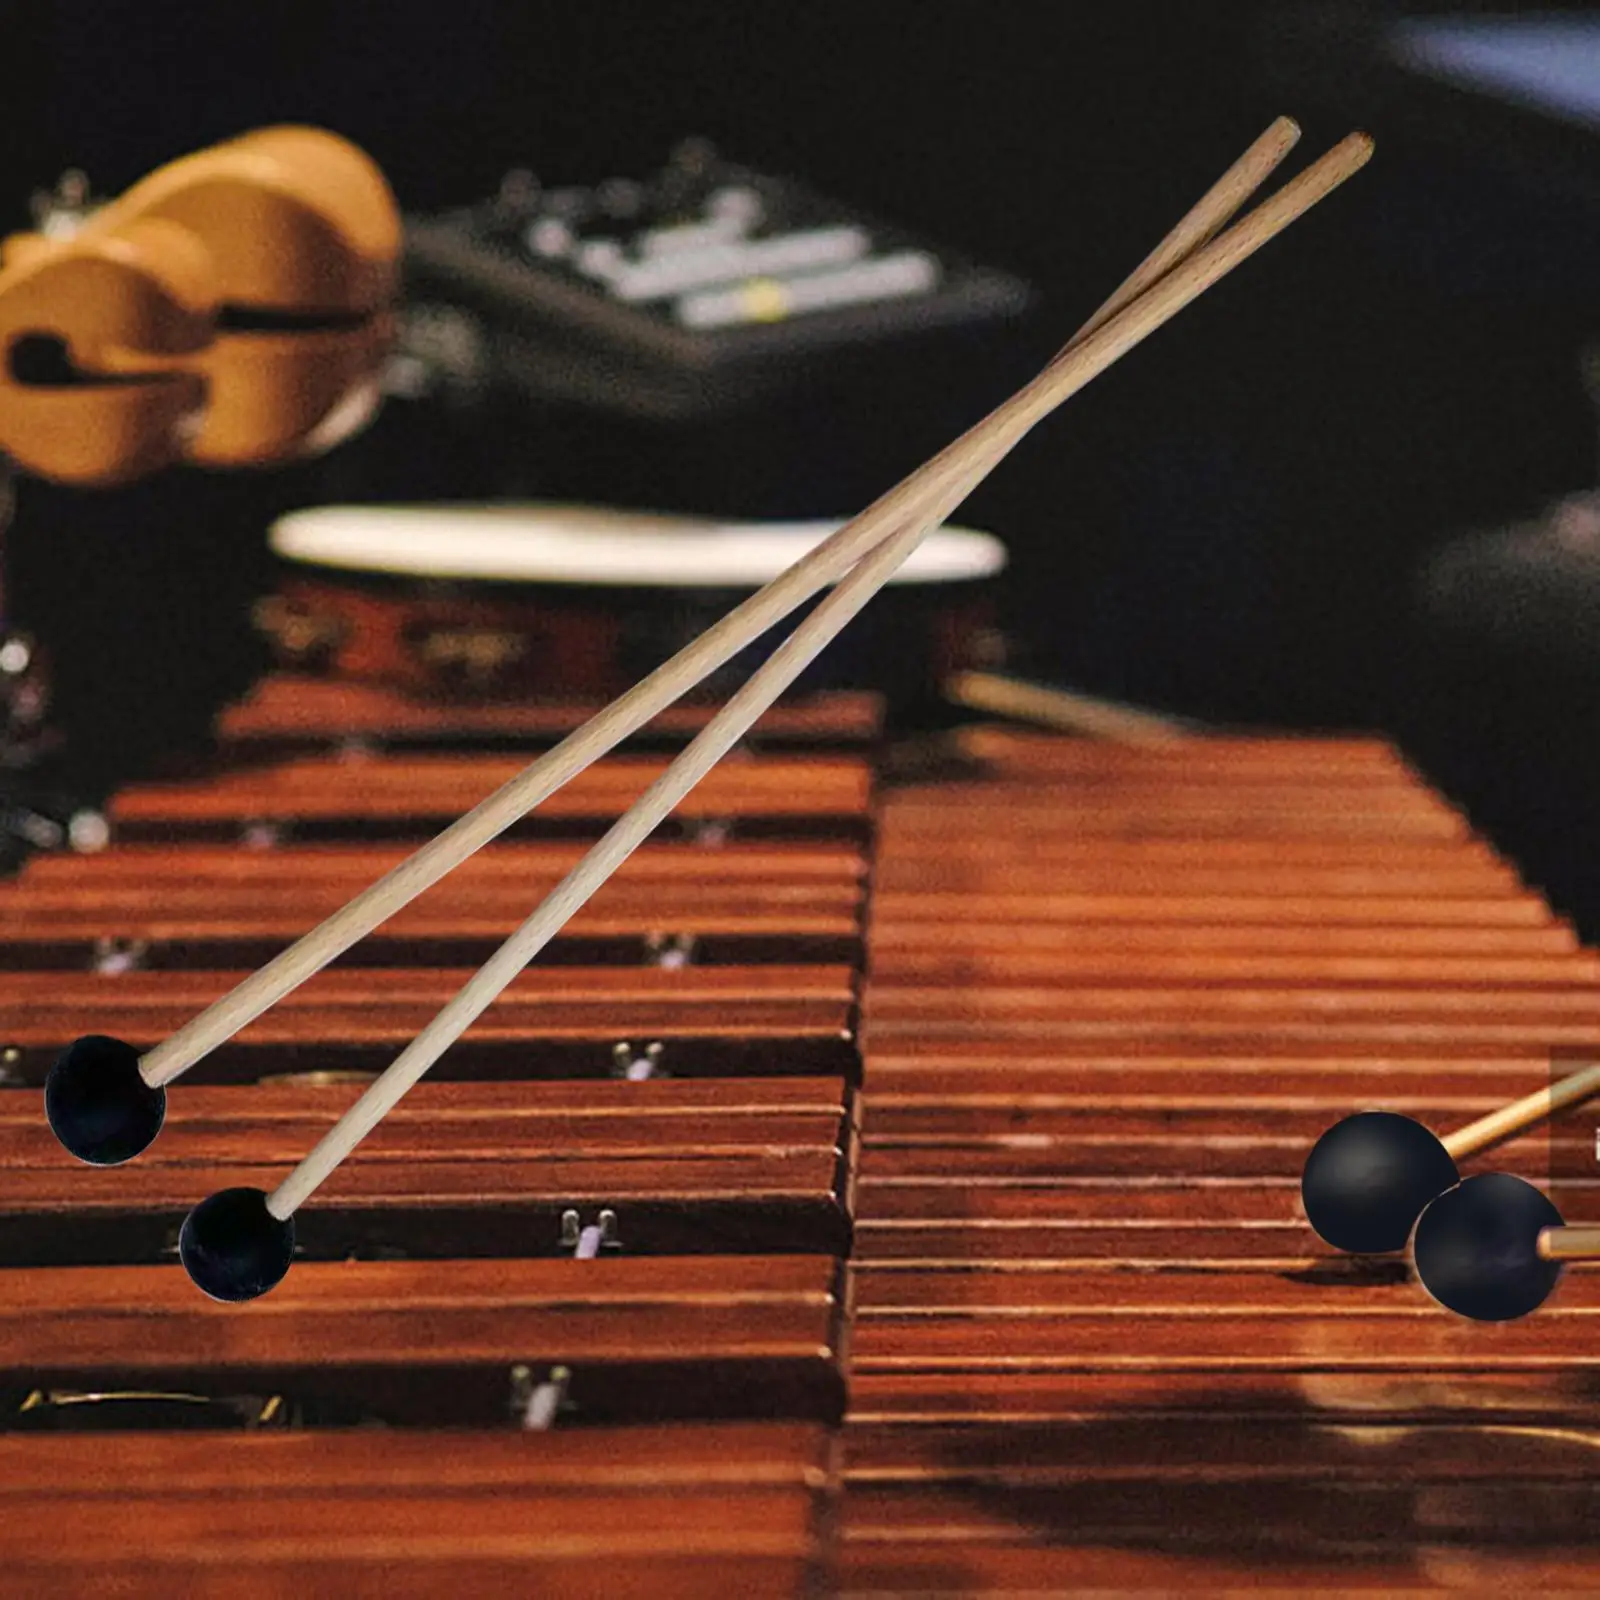 2Pcs Rubber Mallet Percussion Instrument,Xylophone Bell Mallets Sticks for Ethereal Drums Gong Woodblock Drum Bells